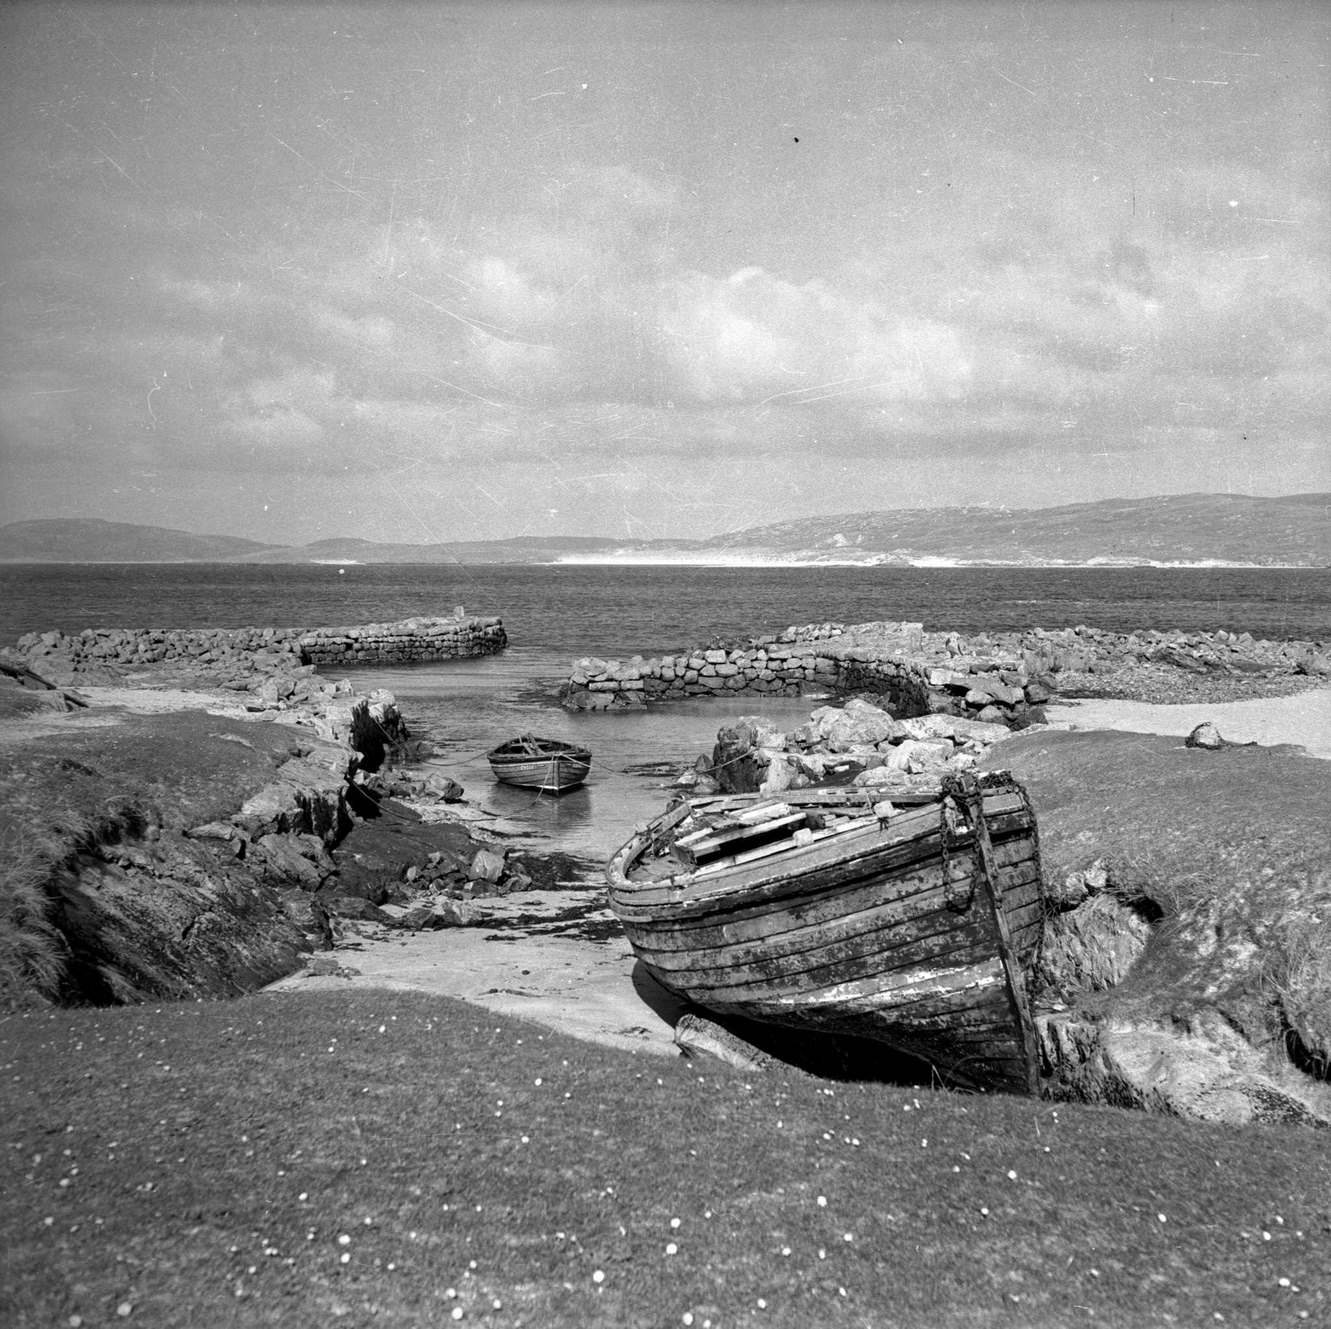 Boats at Eoligarry Jetty on North Bay on the island of Barra in the Outer Hebrides, 1960